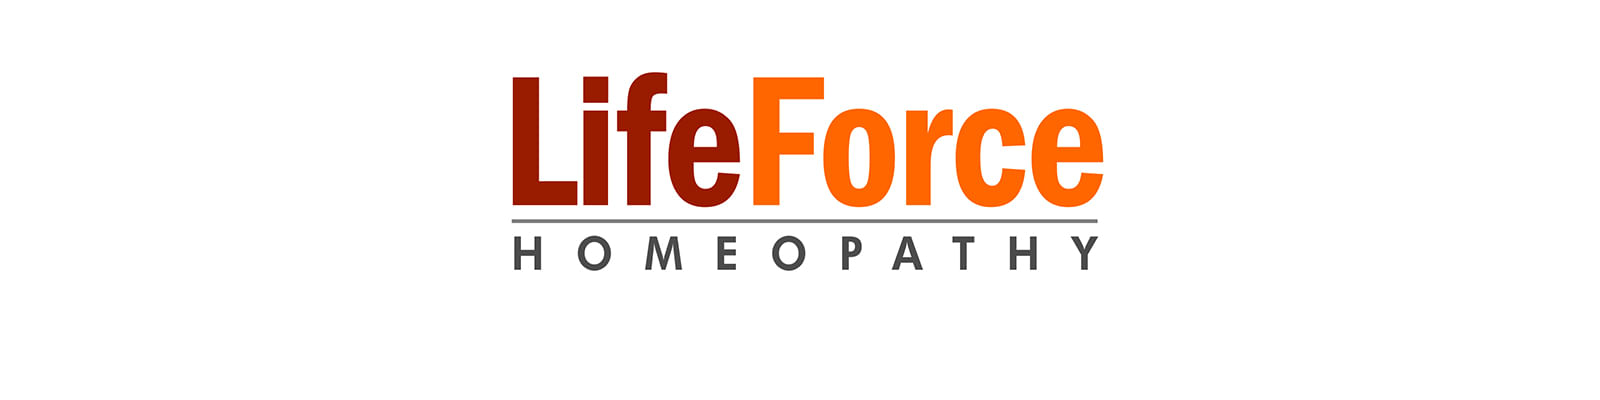 Life Force Homeopathy - Mulund